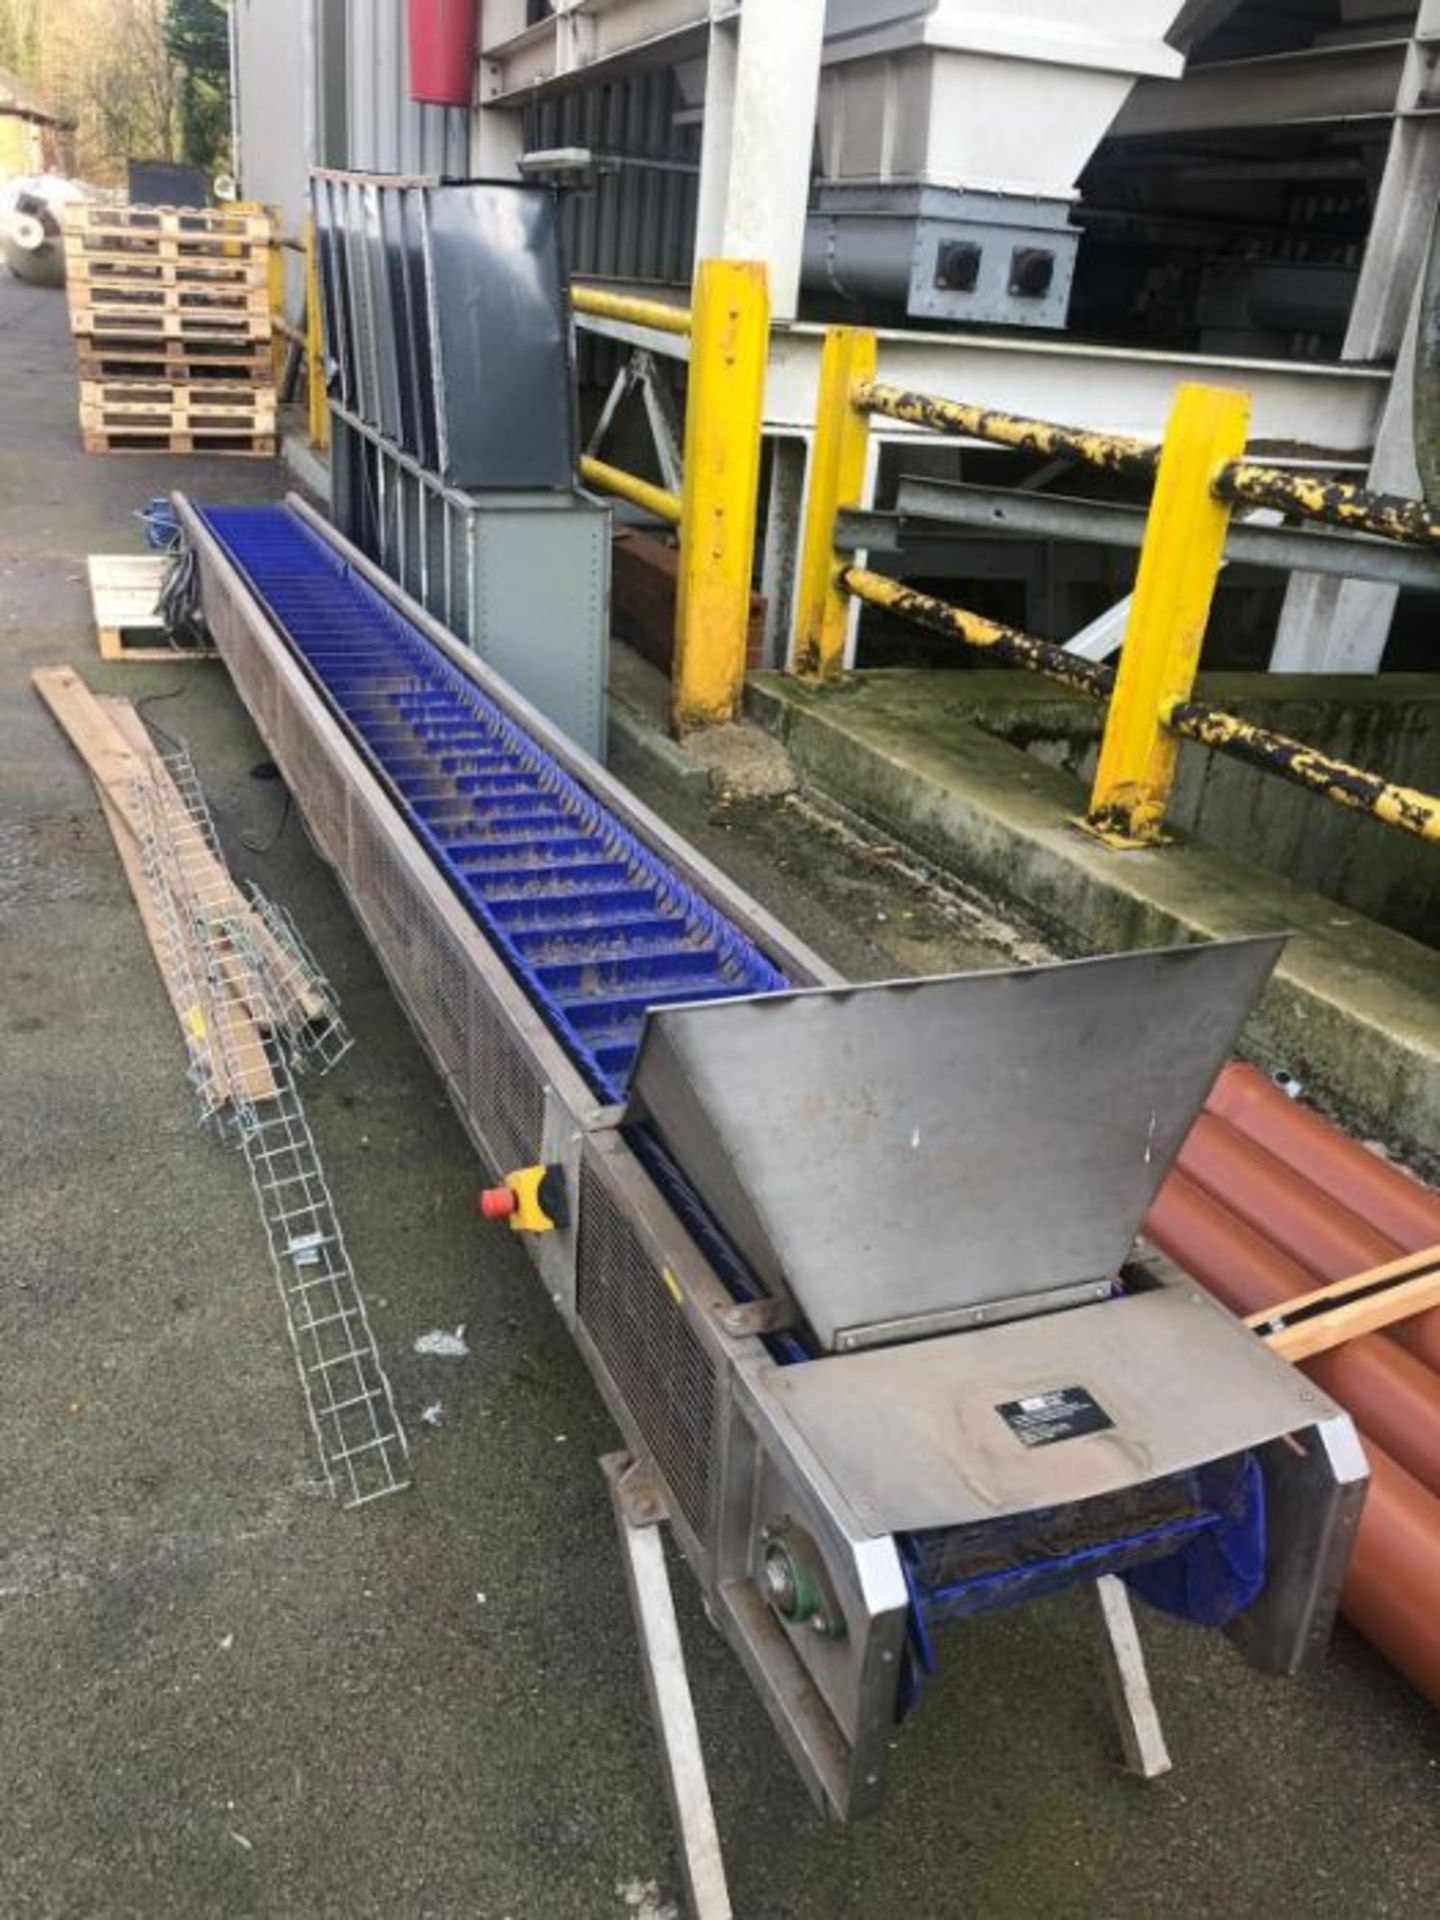 Stainless Steel Cased Plastic Slat Conveyor Elevator, 600mm wide x 6800mm long, Lot located at Islip